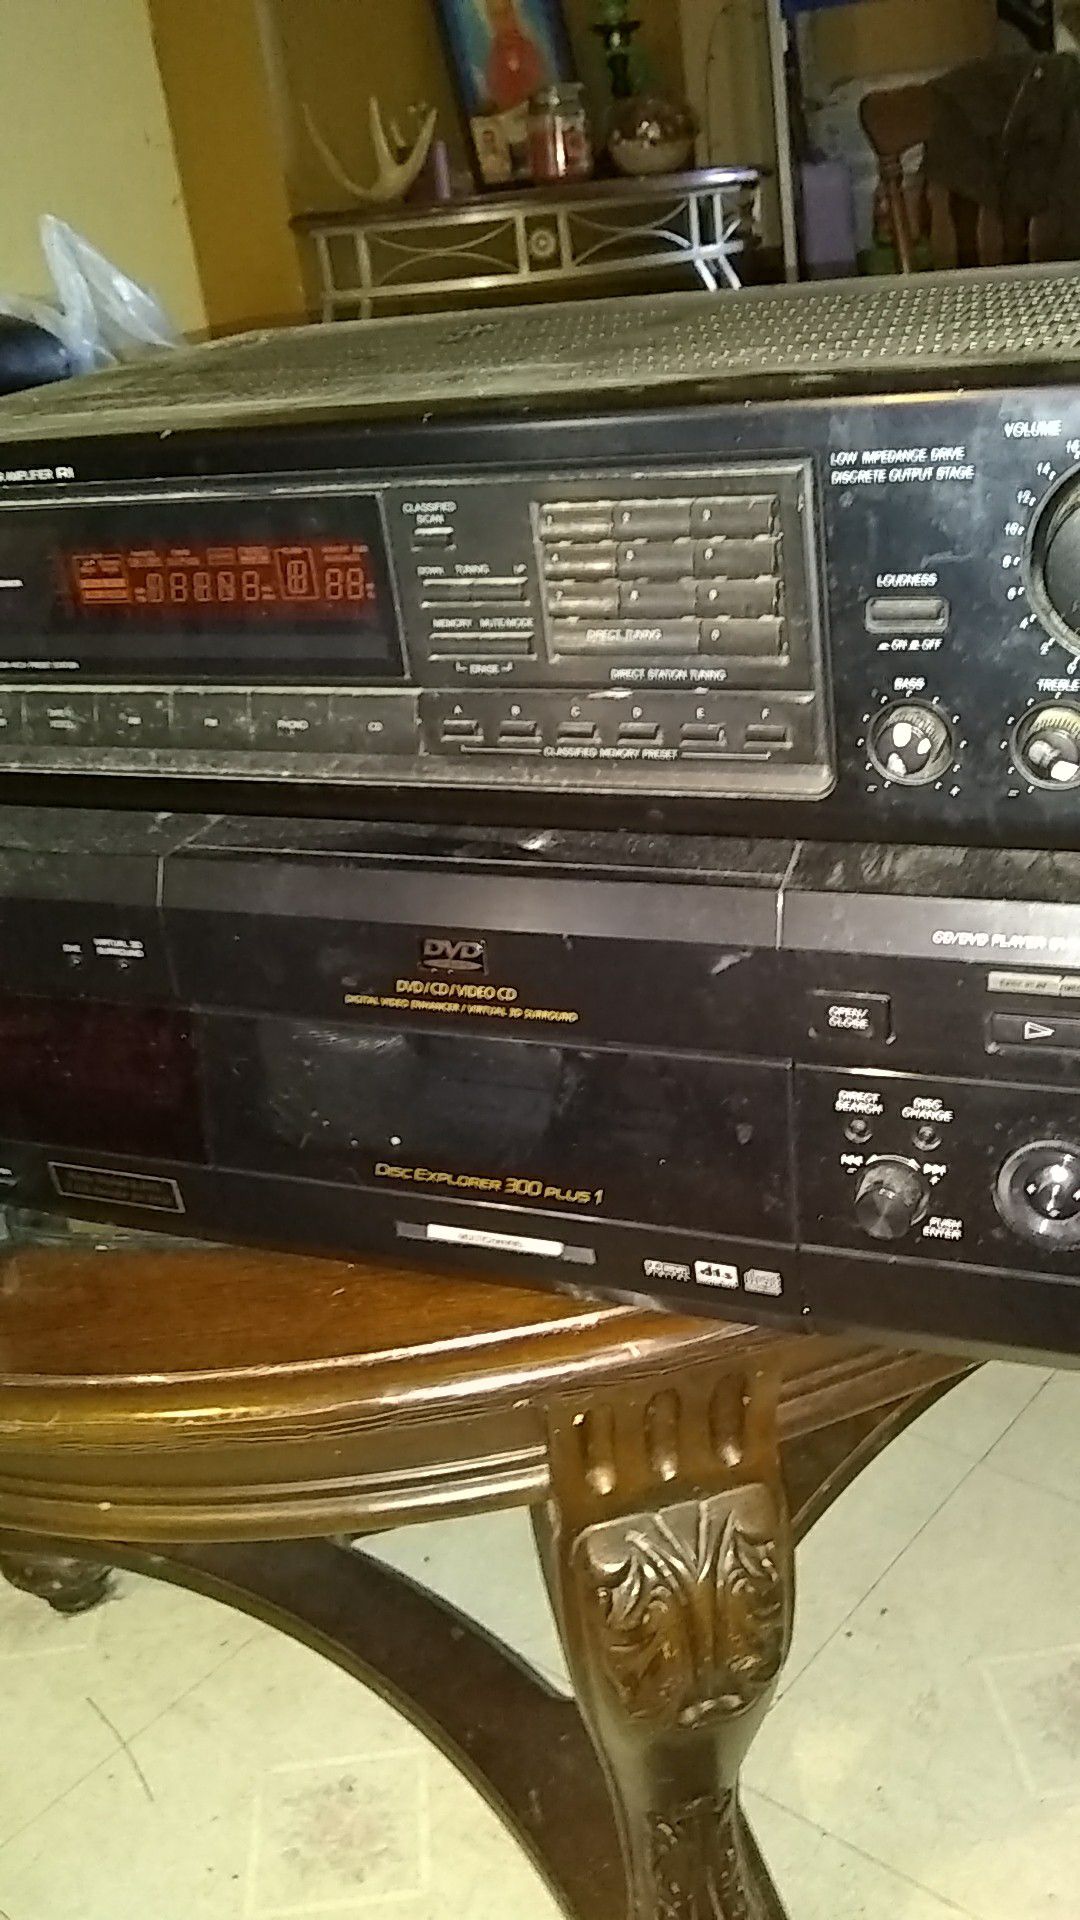 Home amplifier with CD changer